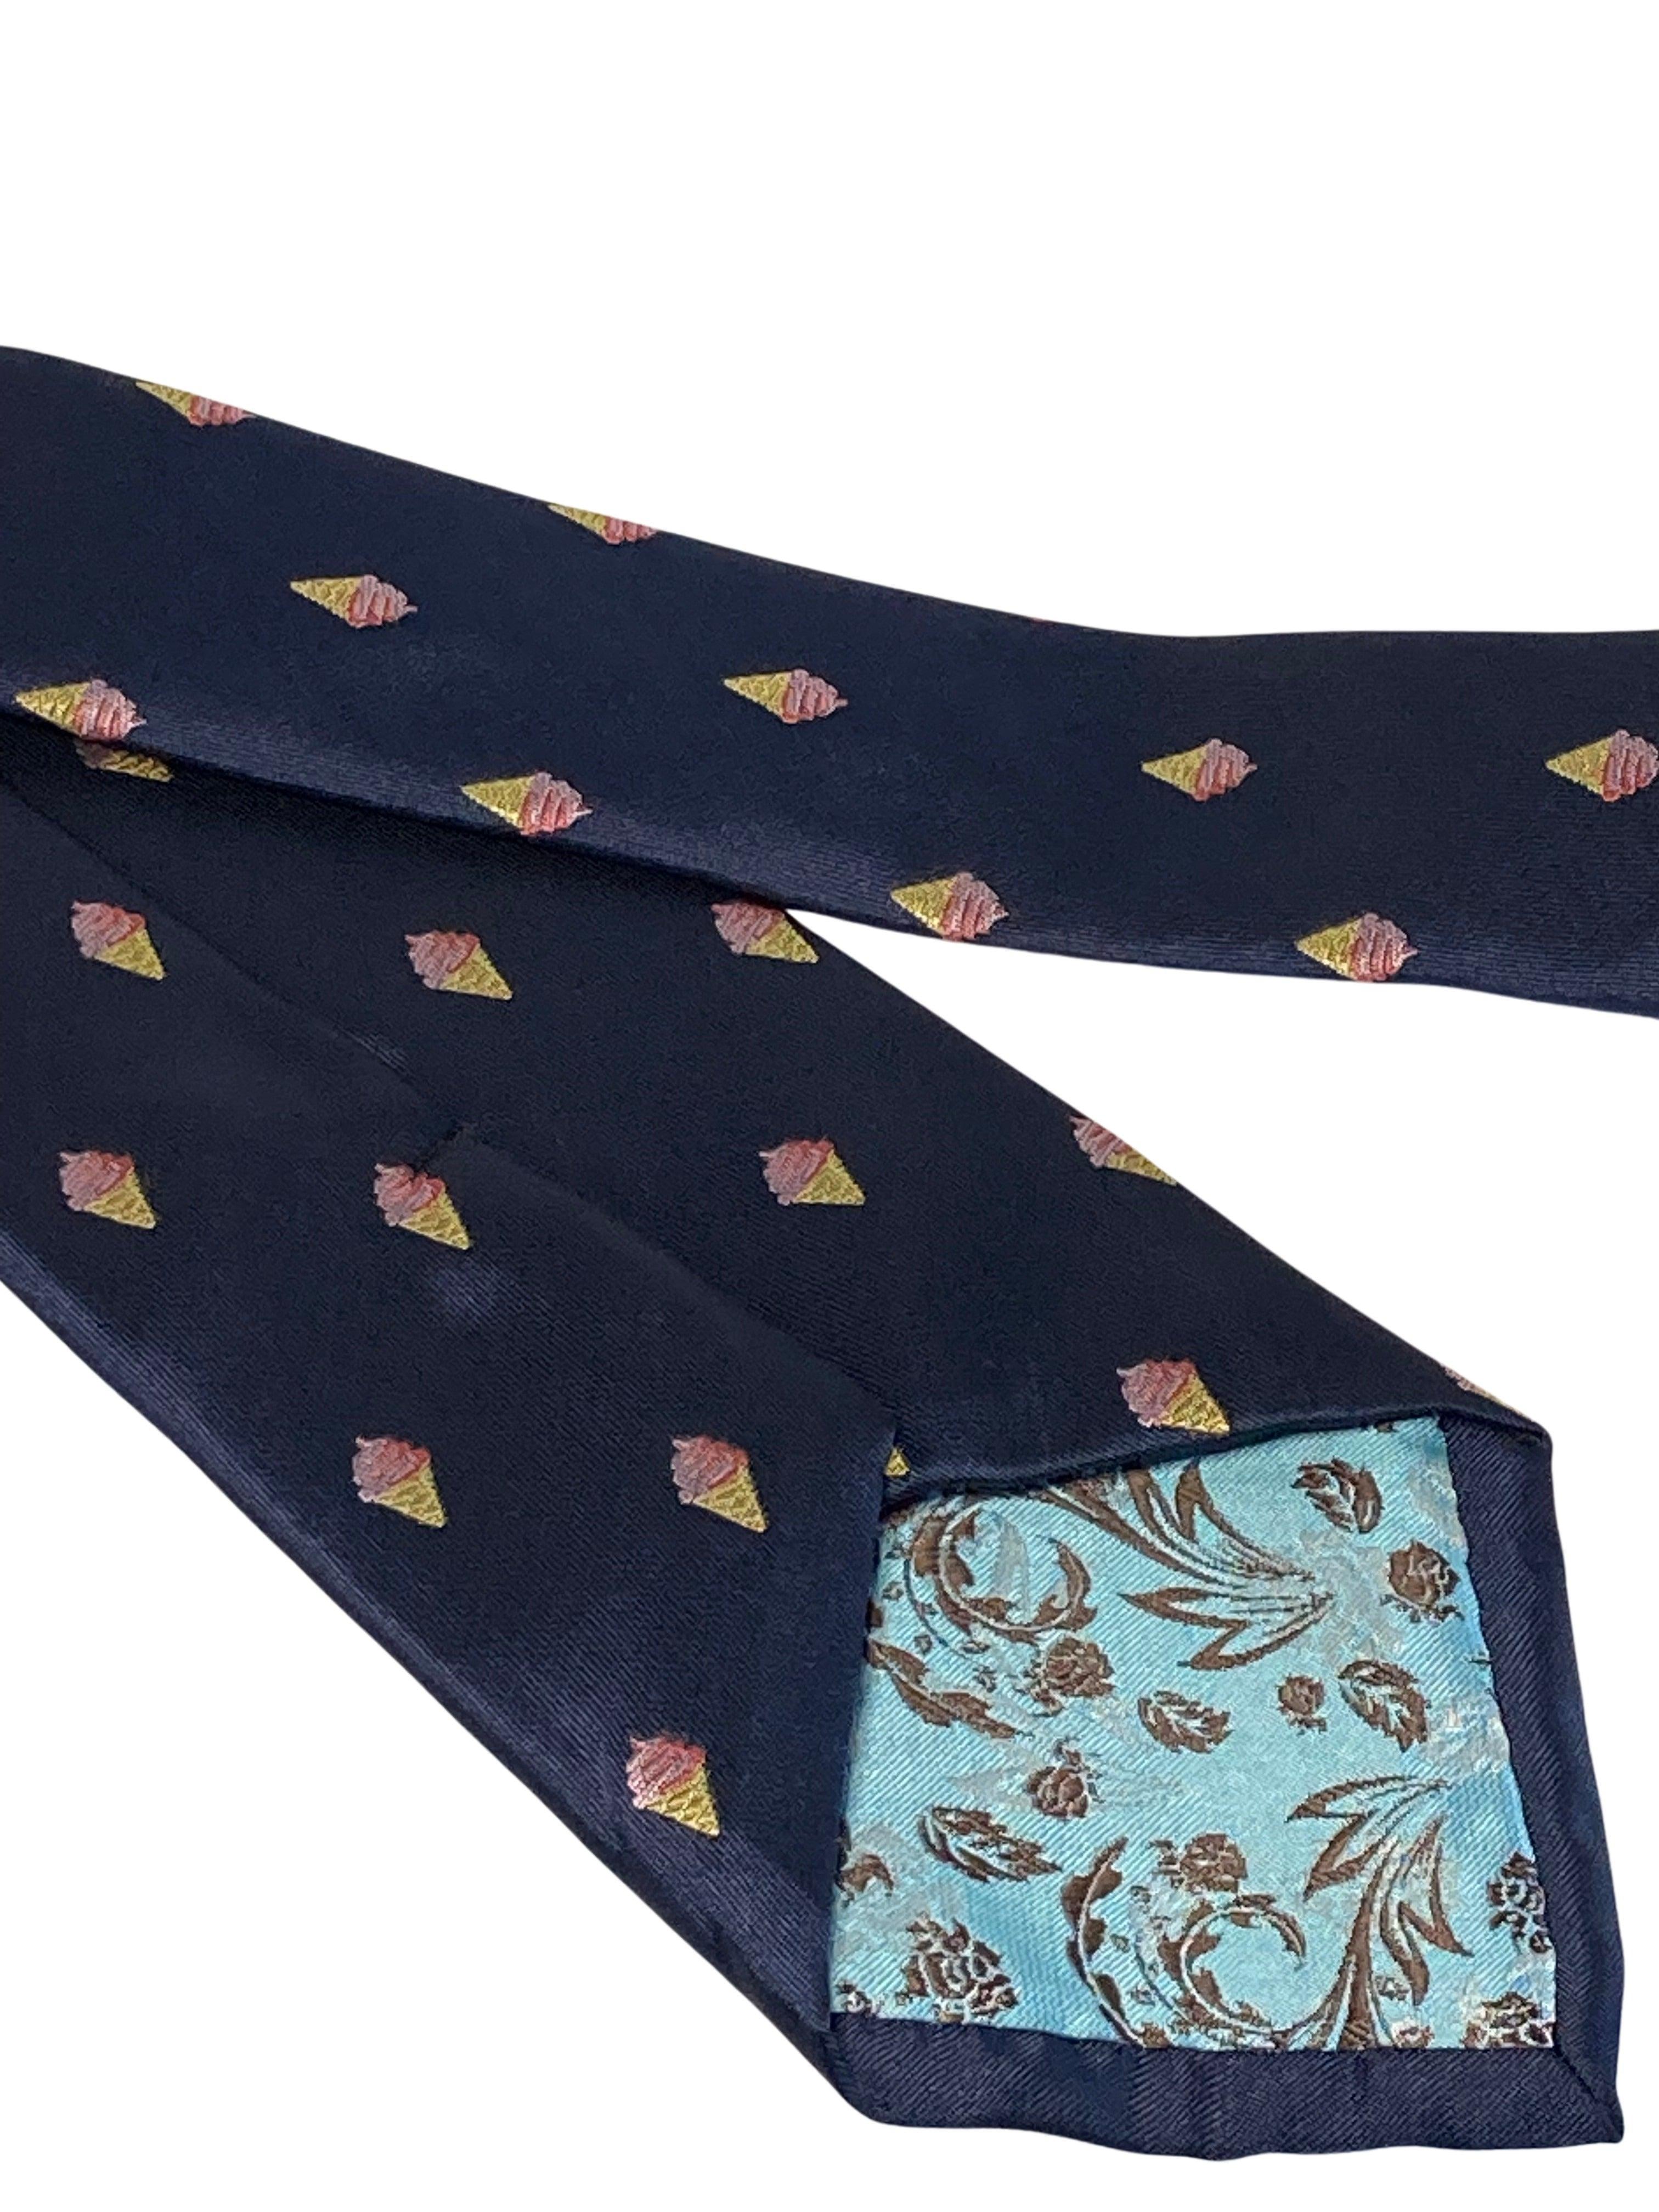 Frederick Thomas navy blue tie with white spots in 100% cotton FT3194 